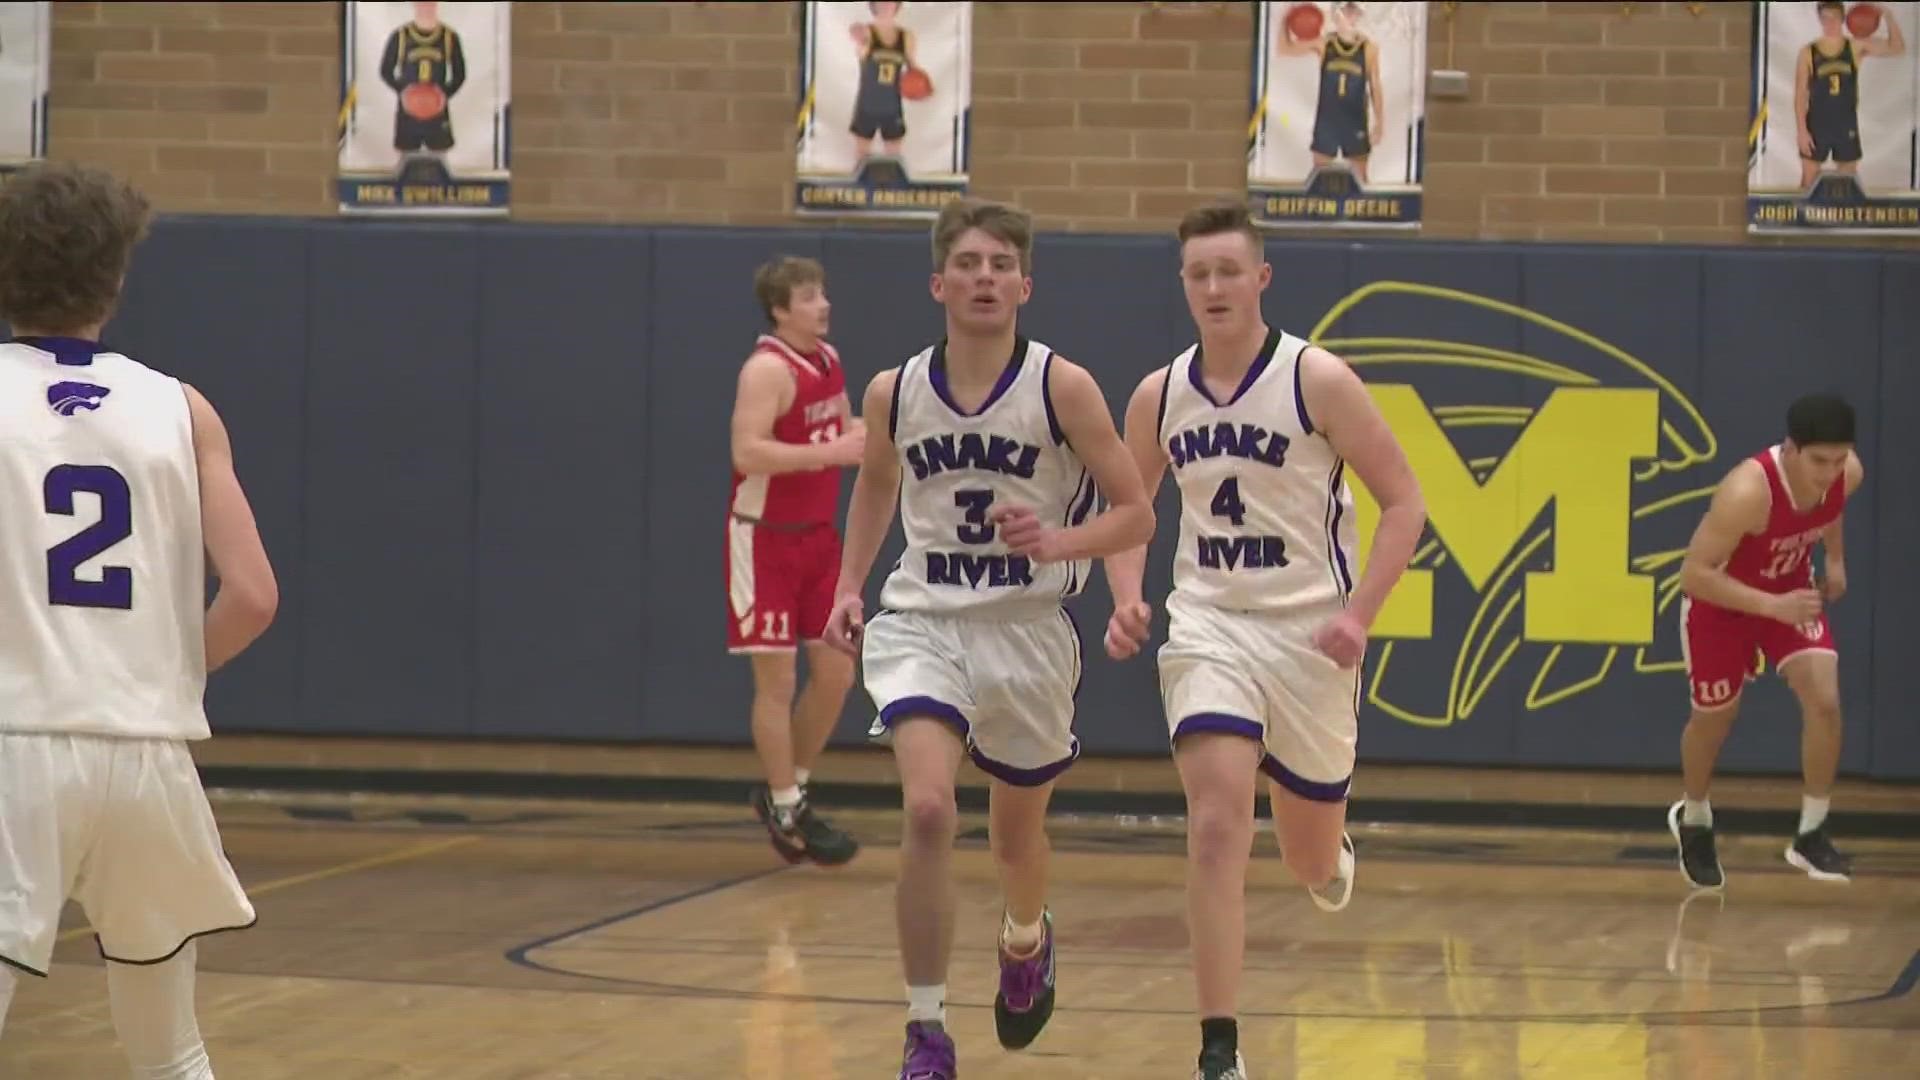 The No. 4 Panthers punched their ticket to Friday's 3A state semifinals with a 64-54 win over No. 5 Homedale. Snake River faces Bonners Ferry on Friday.